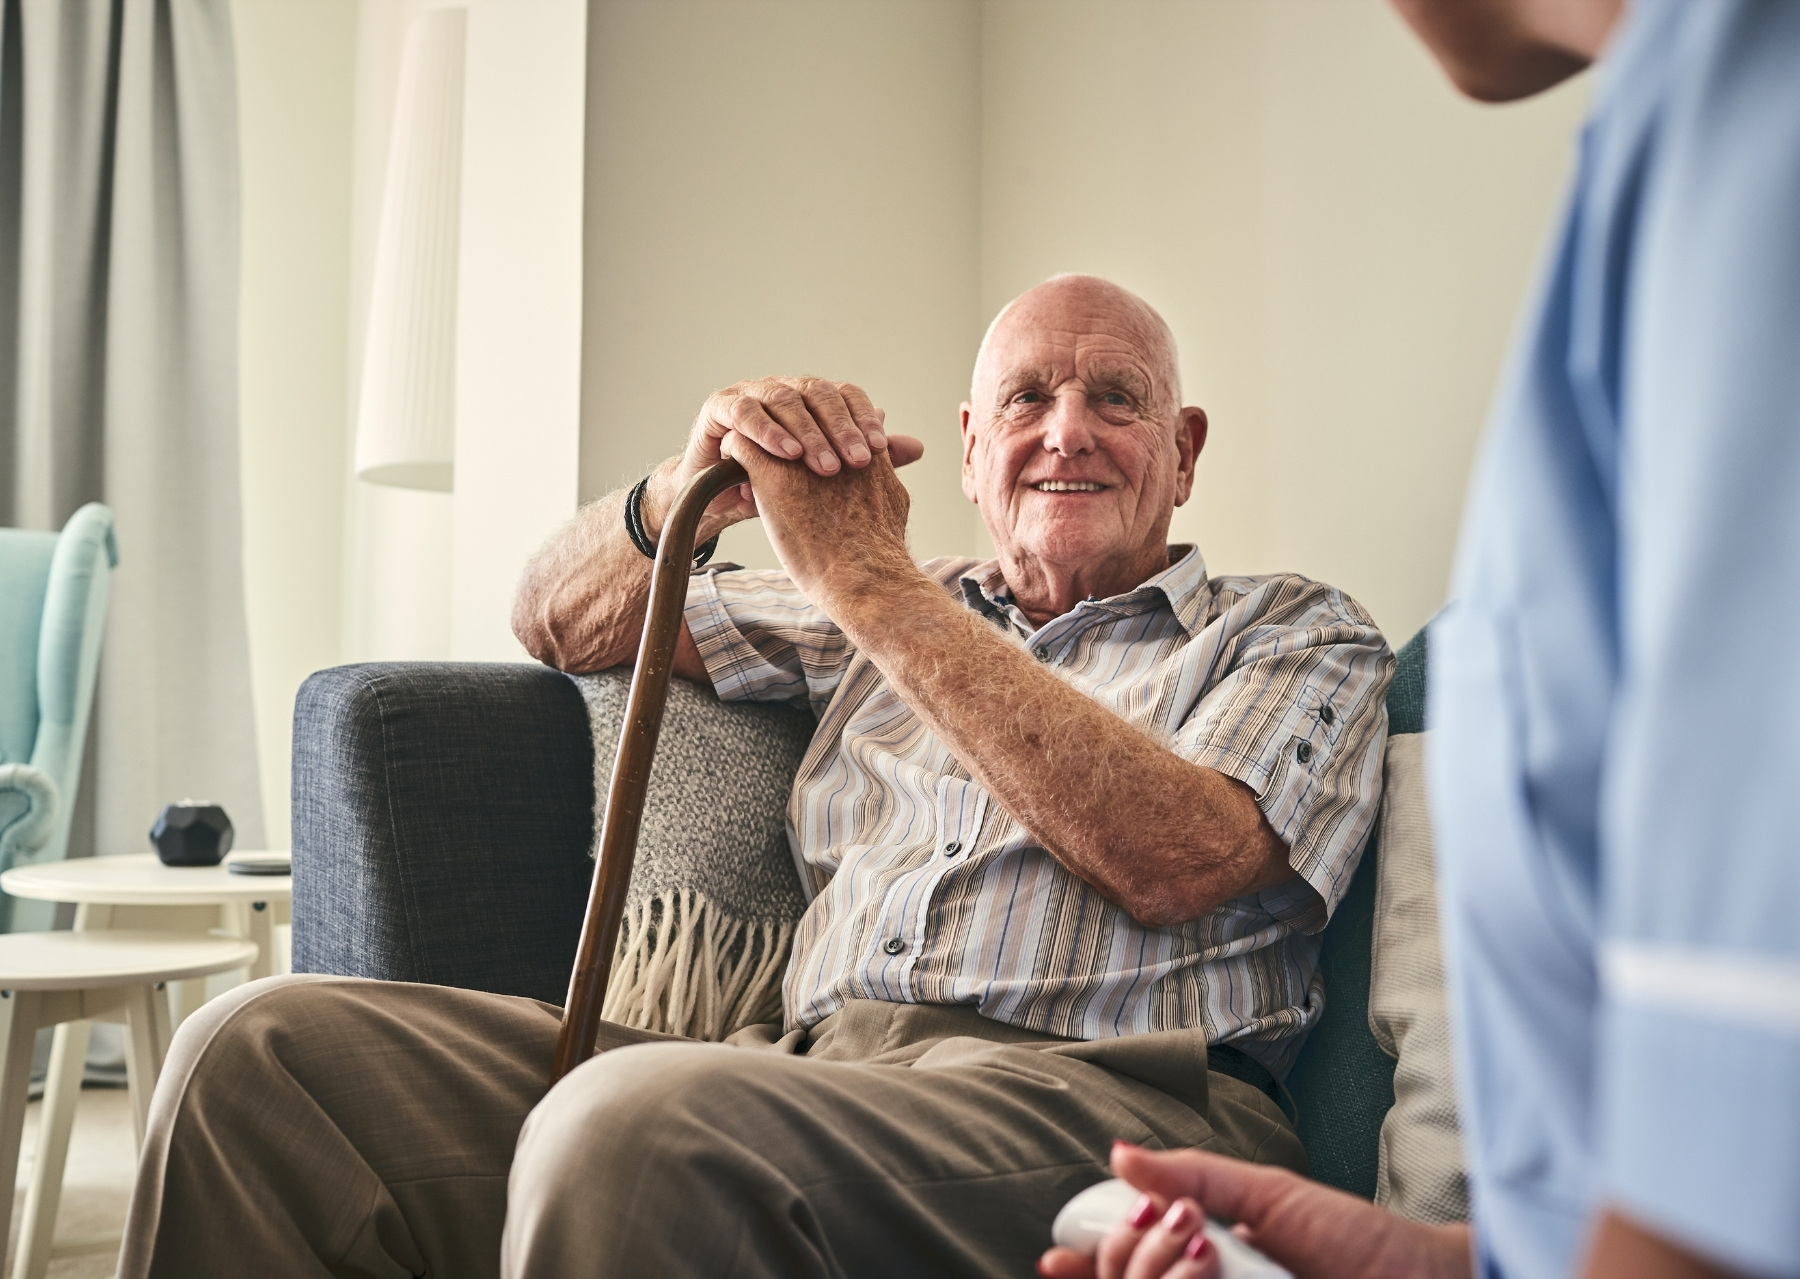 Becoming a carer is rewarding